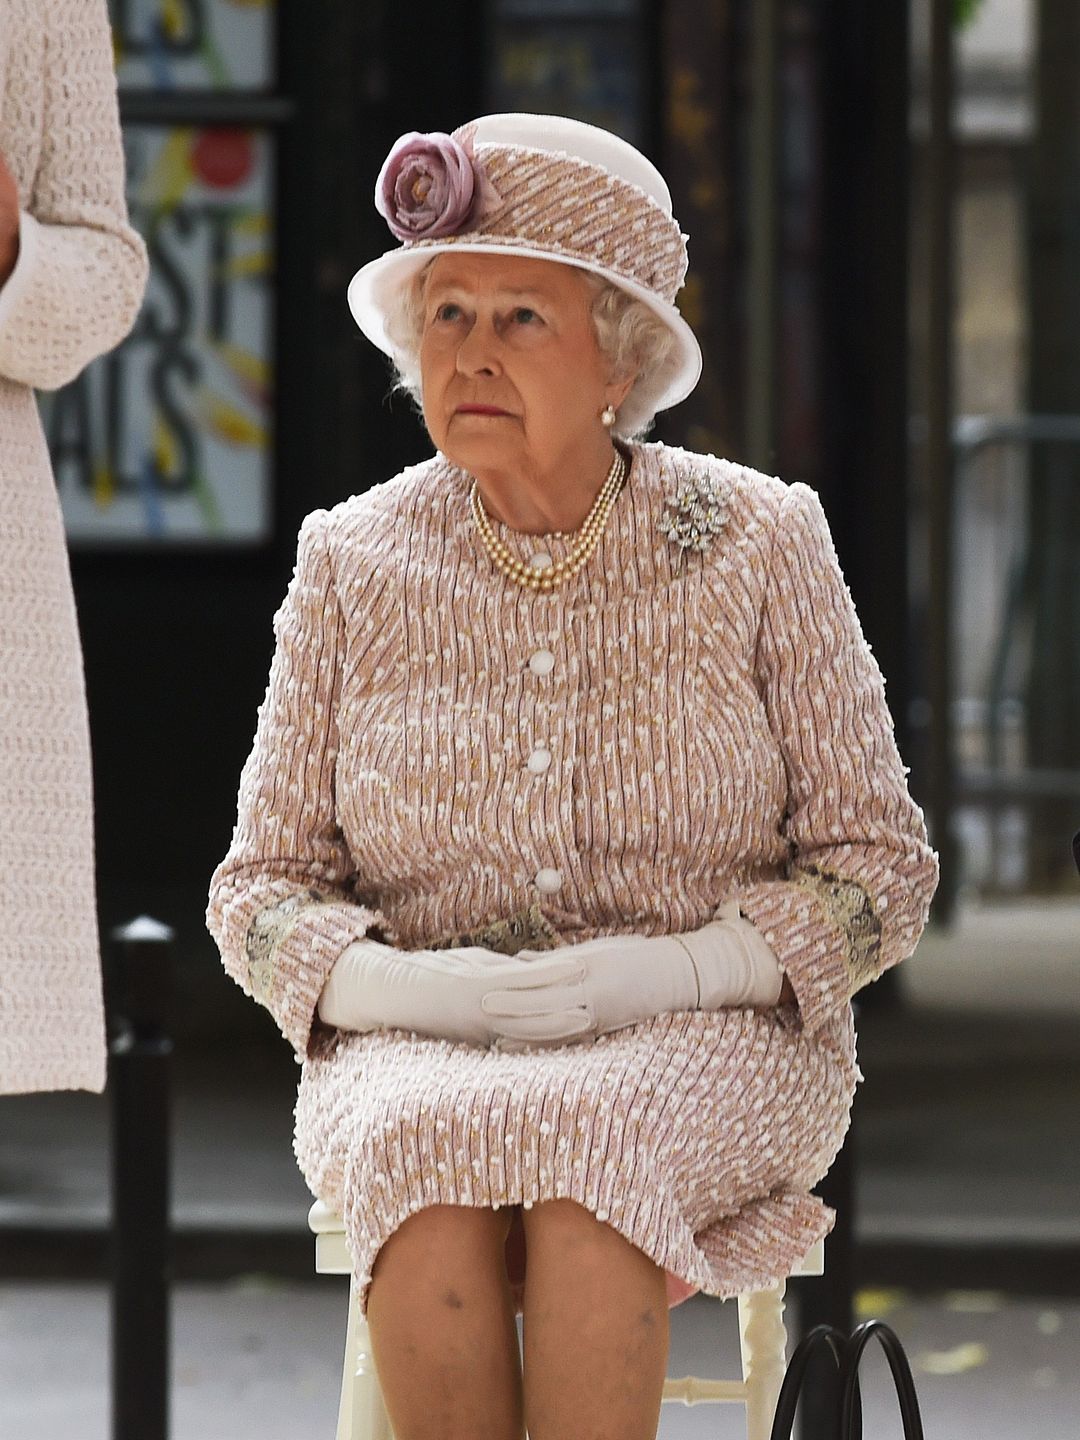 queen on chair with black handbag 